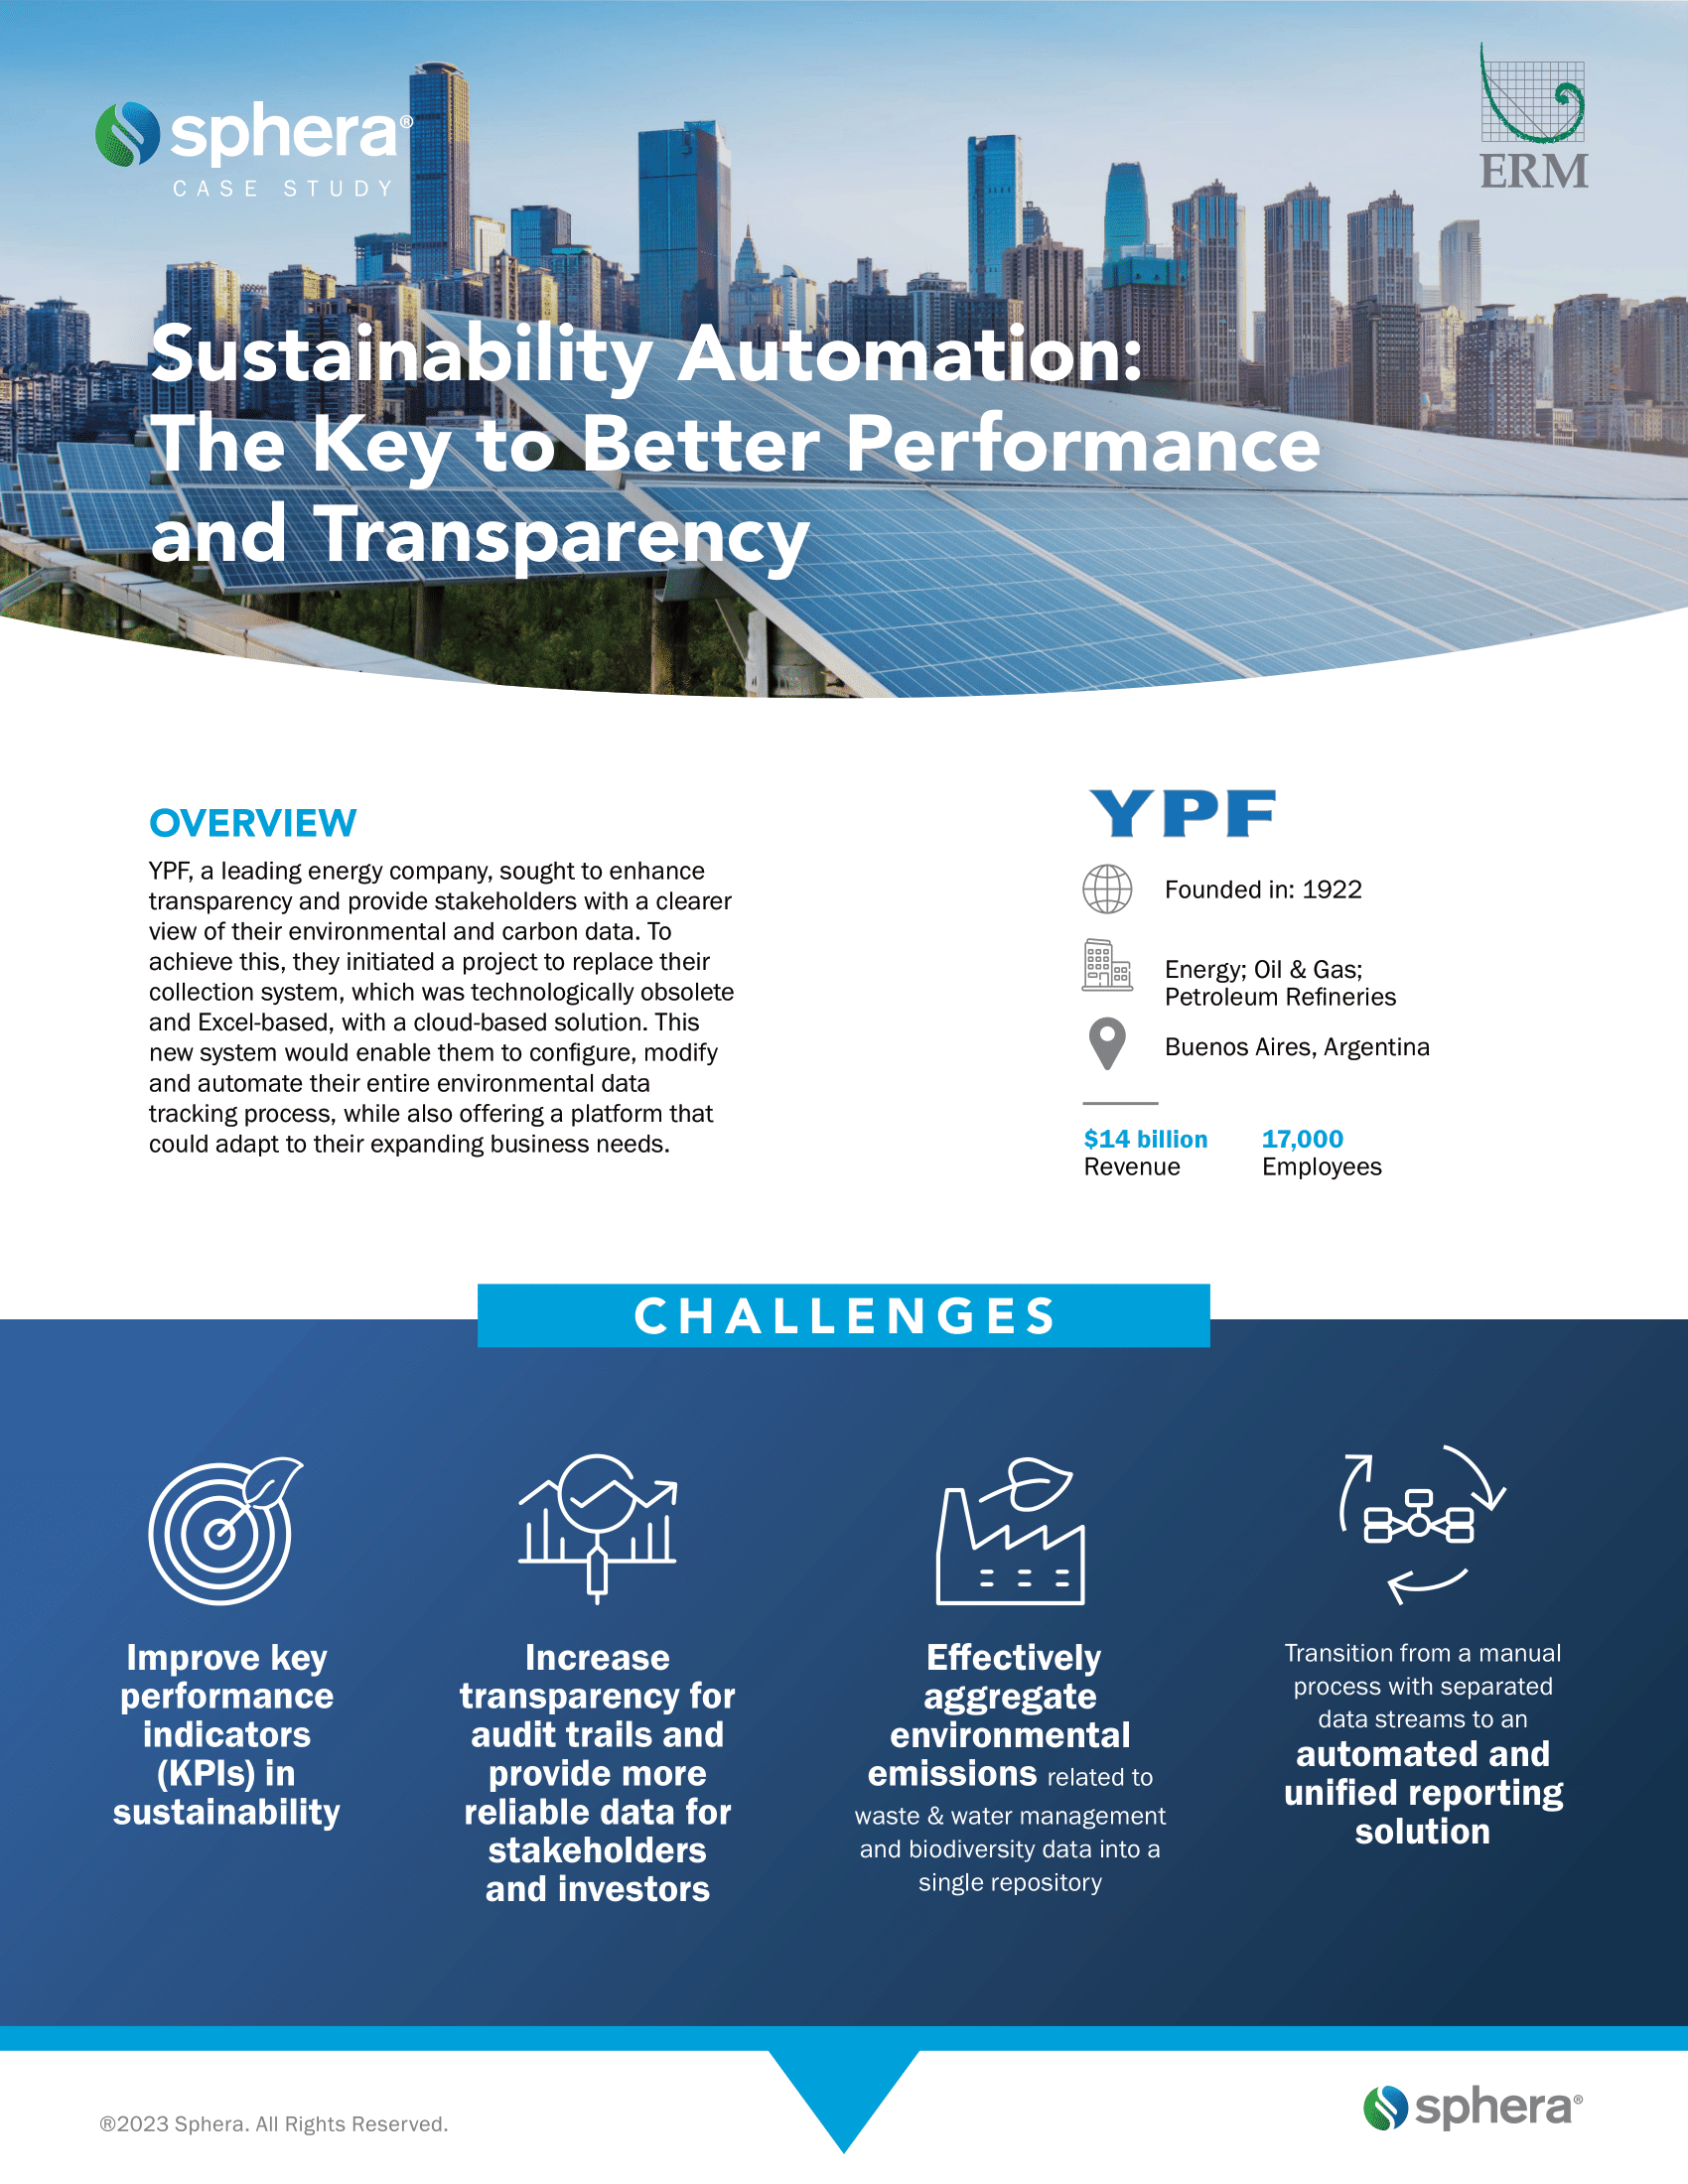 Sustainability Automation: The Key to Better Performance and Transparency